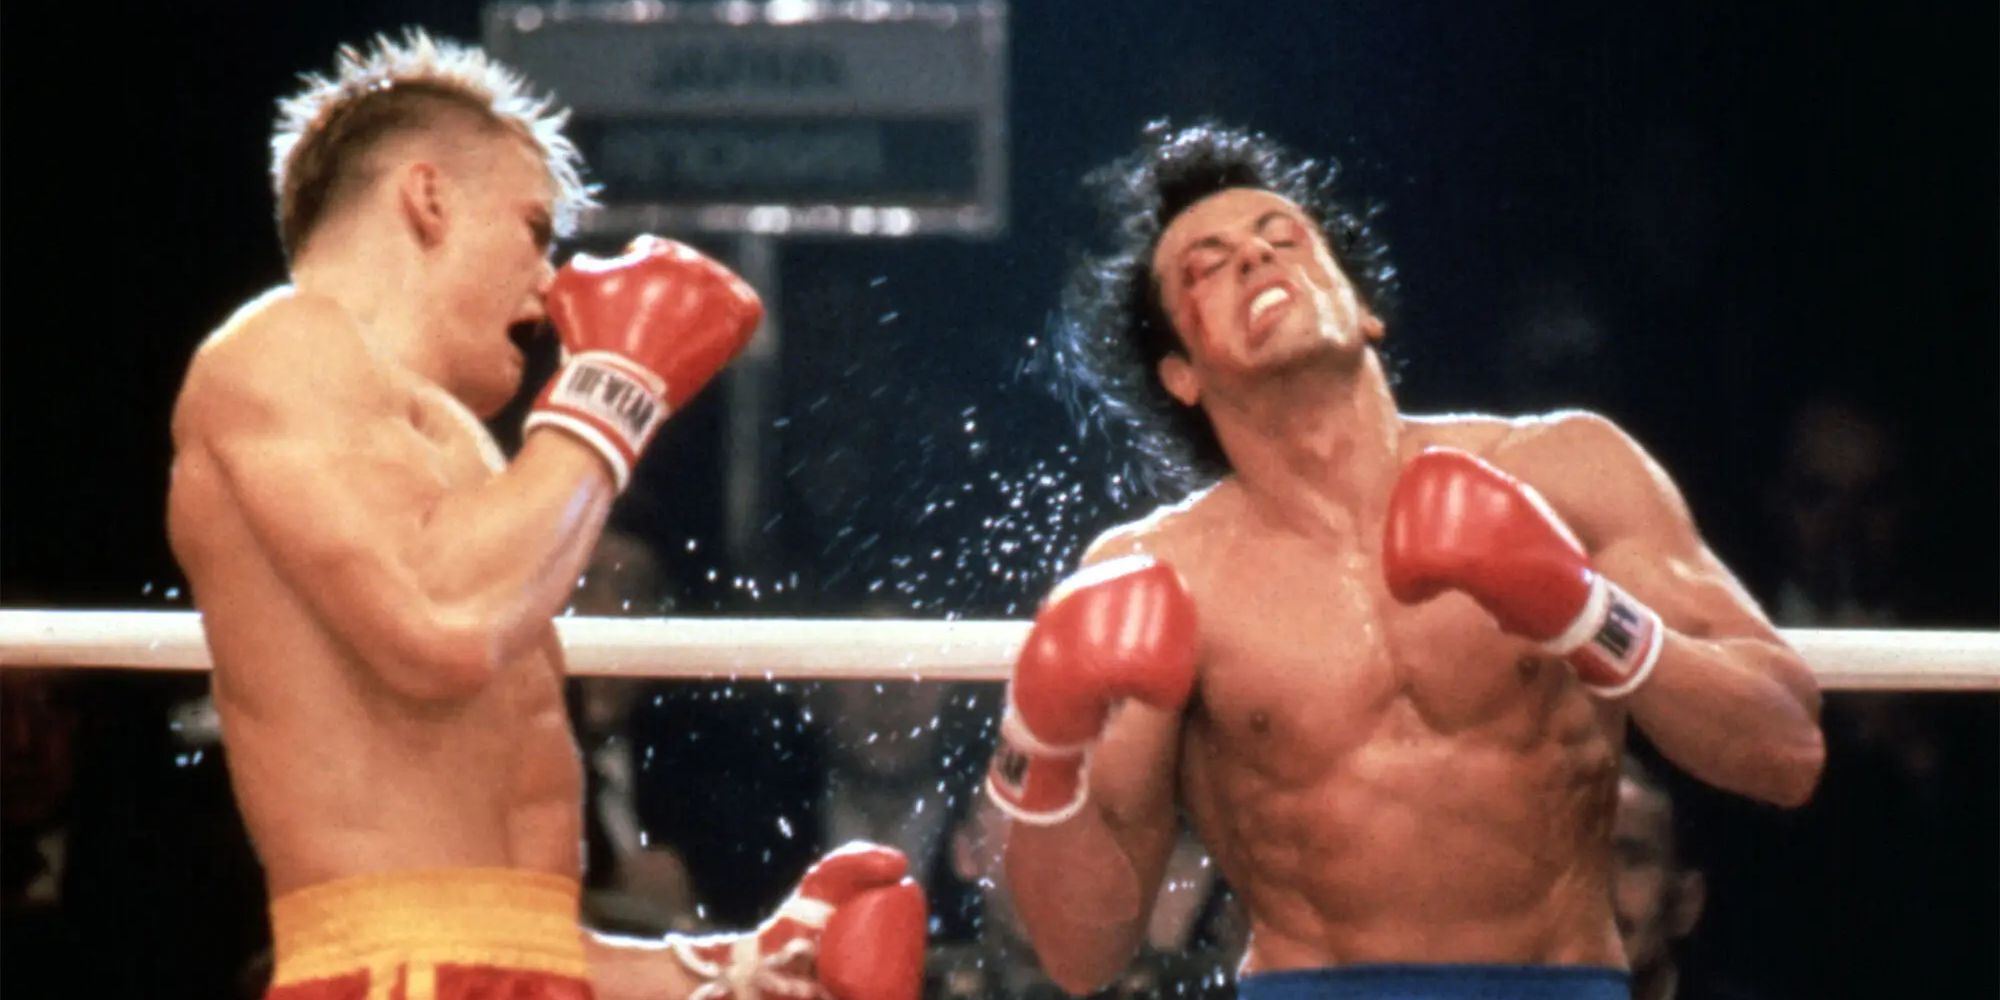 Ivan Drago punching Rocky Balboa during their match in Rocky IV